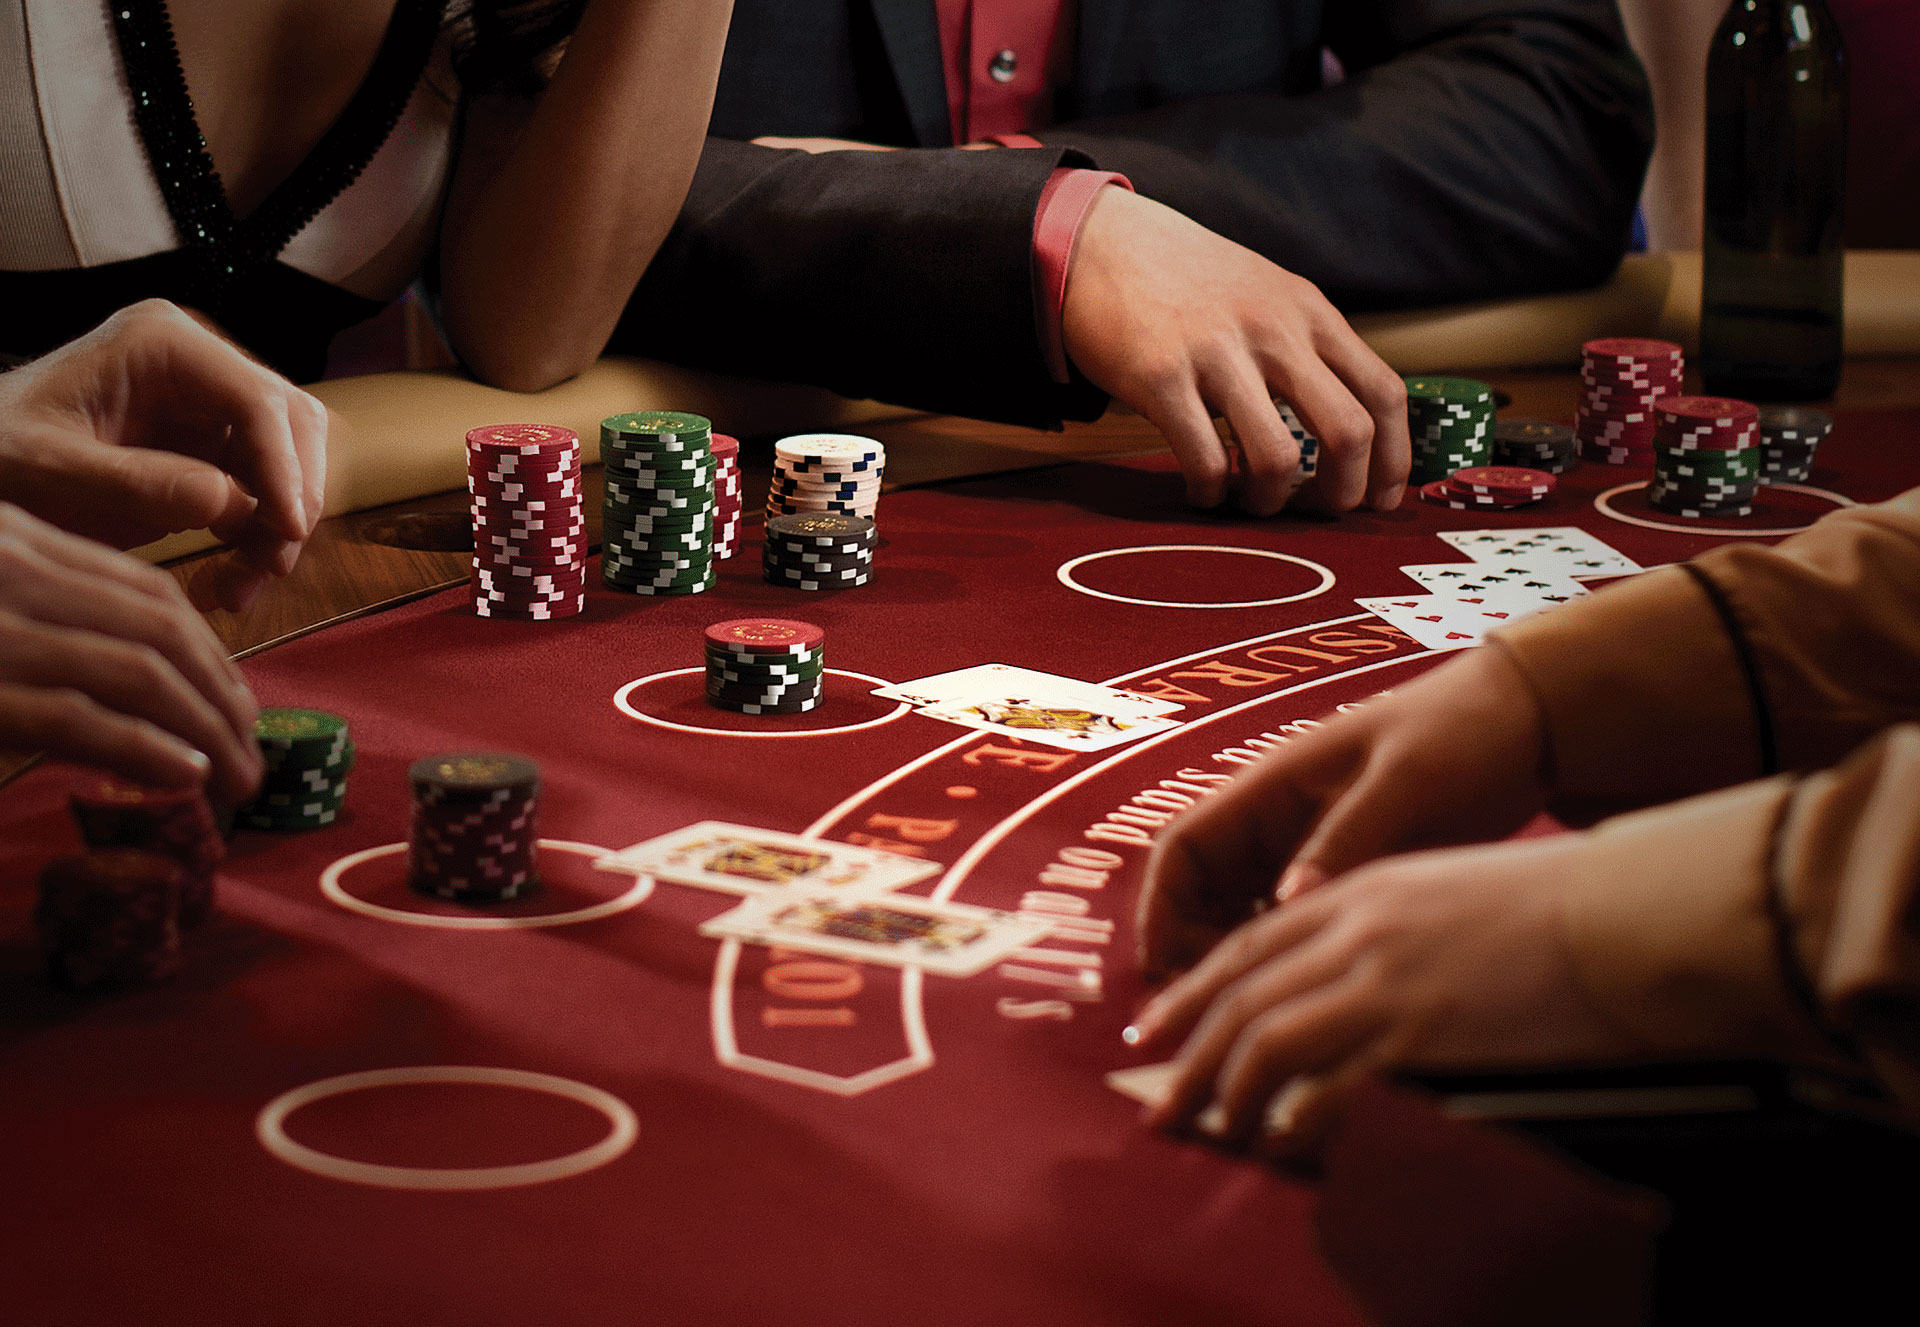 Time to earn more money through online gambling and games